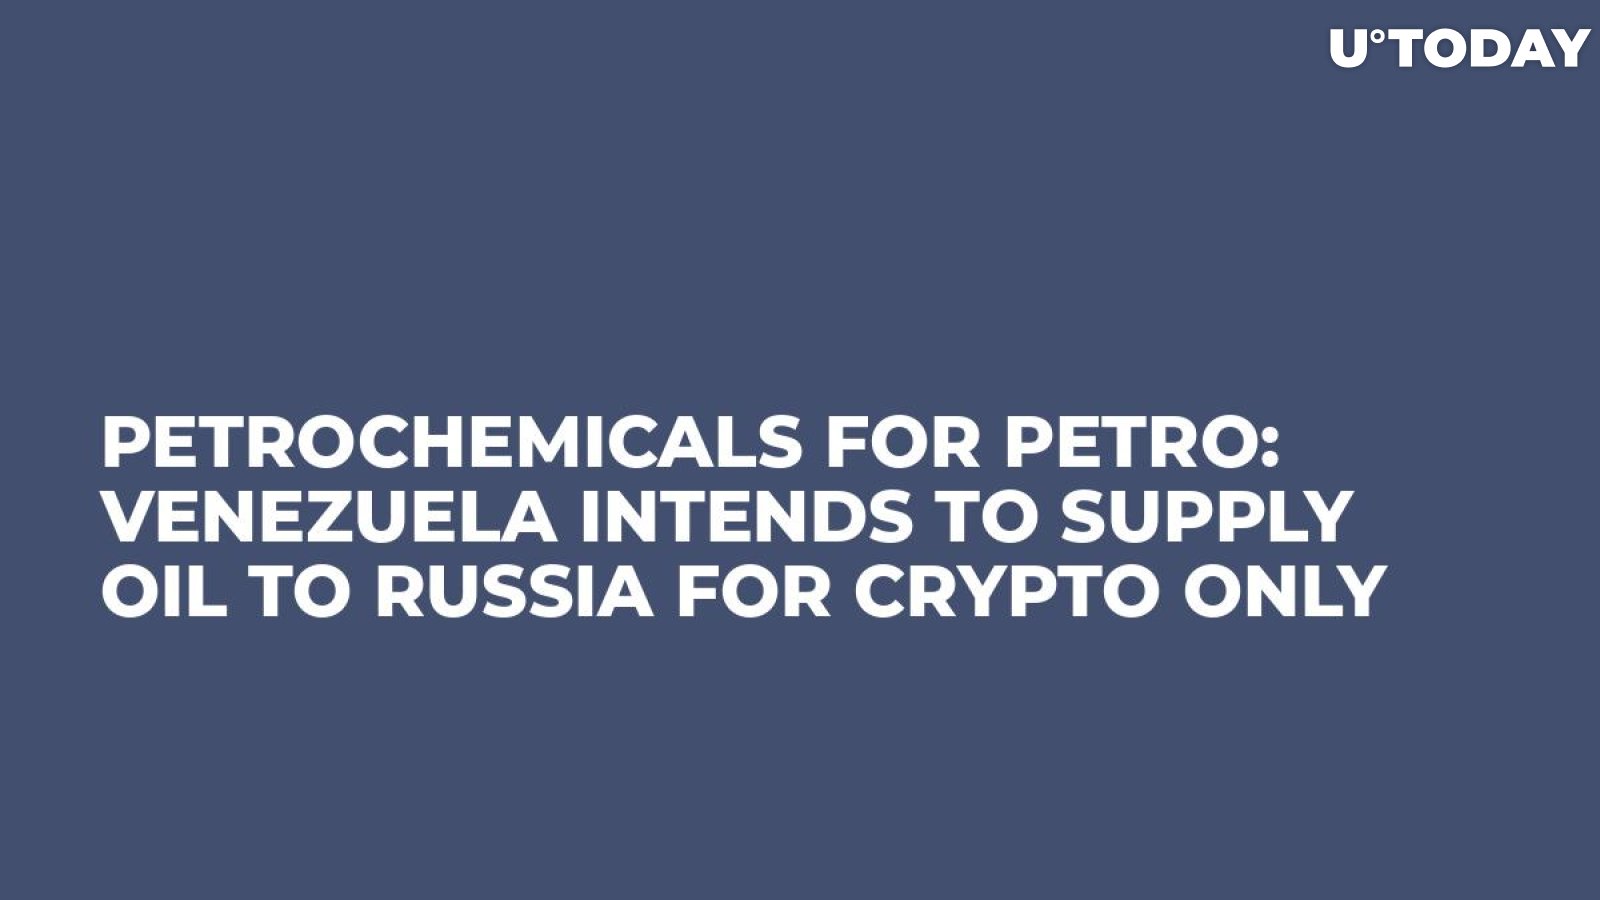 Petrochemicals for Petro: Venezuela Intends to Supply Oil to Russia for Crypto Only